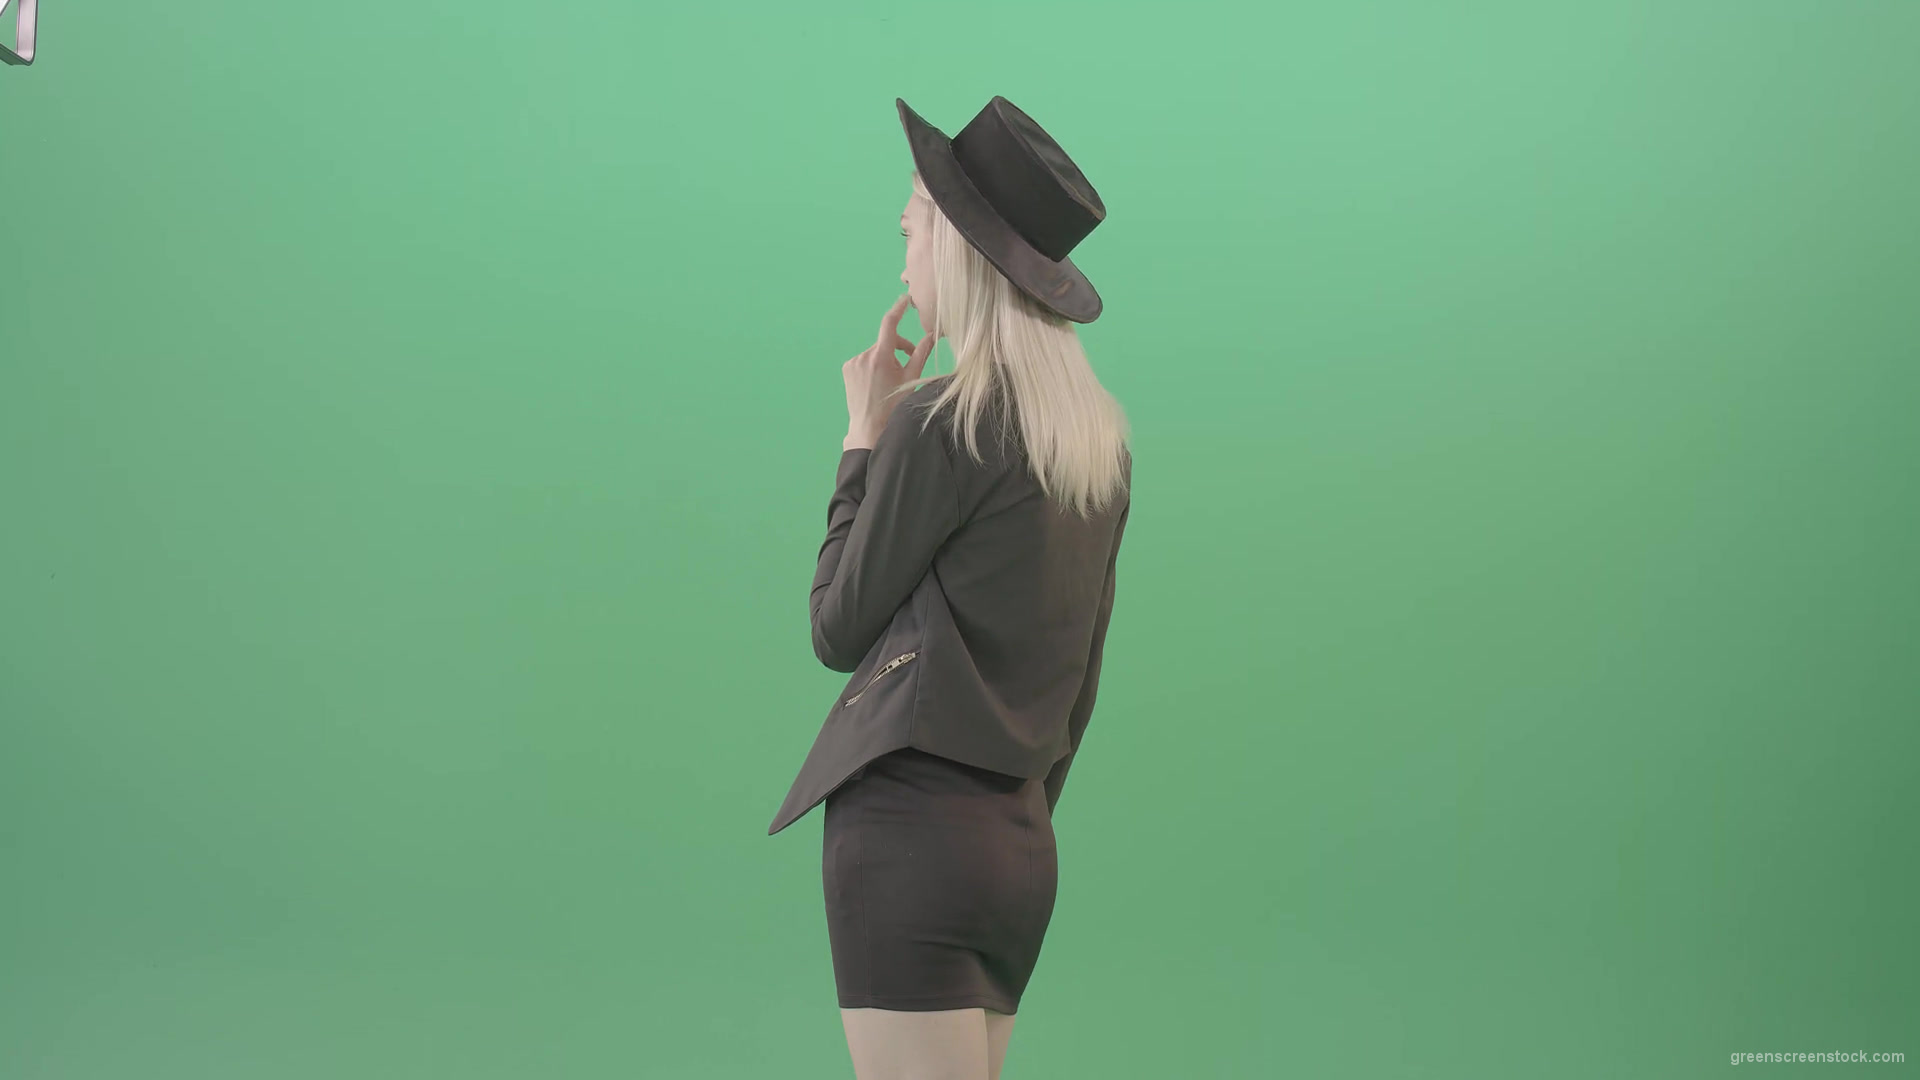 Back-view-black-costume-blonde-girl-looking-virtual-products-on-touch-screen-4K-Green-Screen-Video-Footage-1920_005 Green Screen Stock